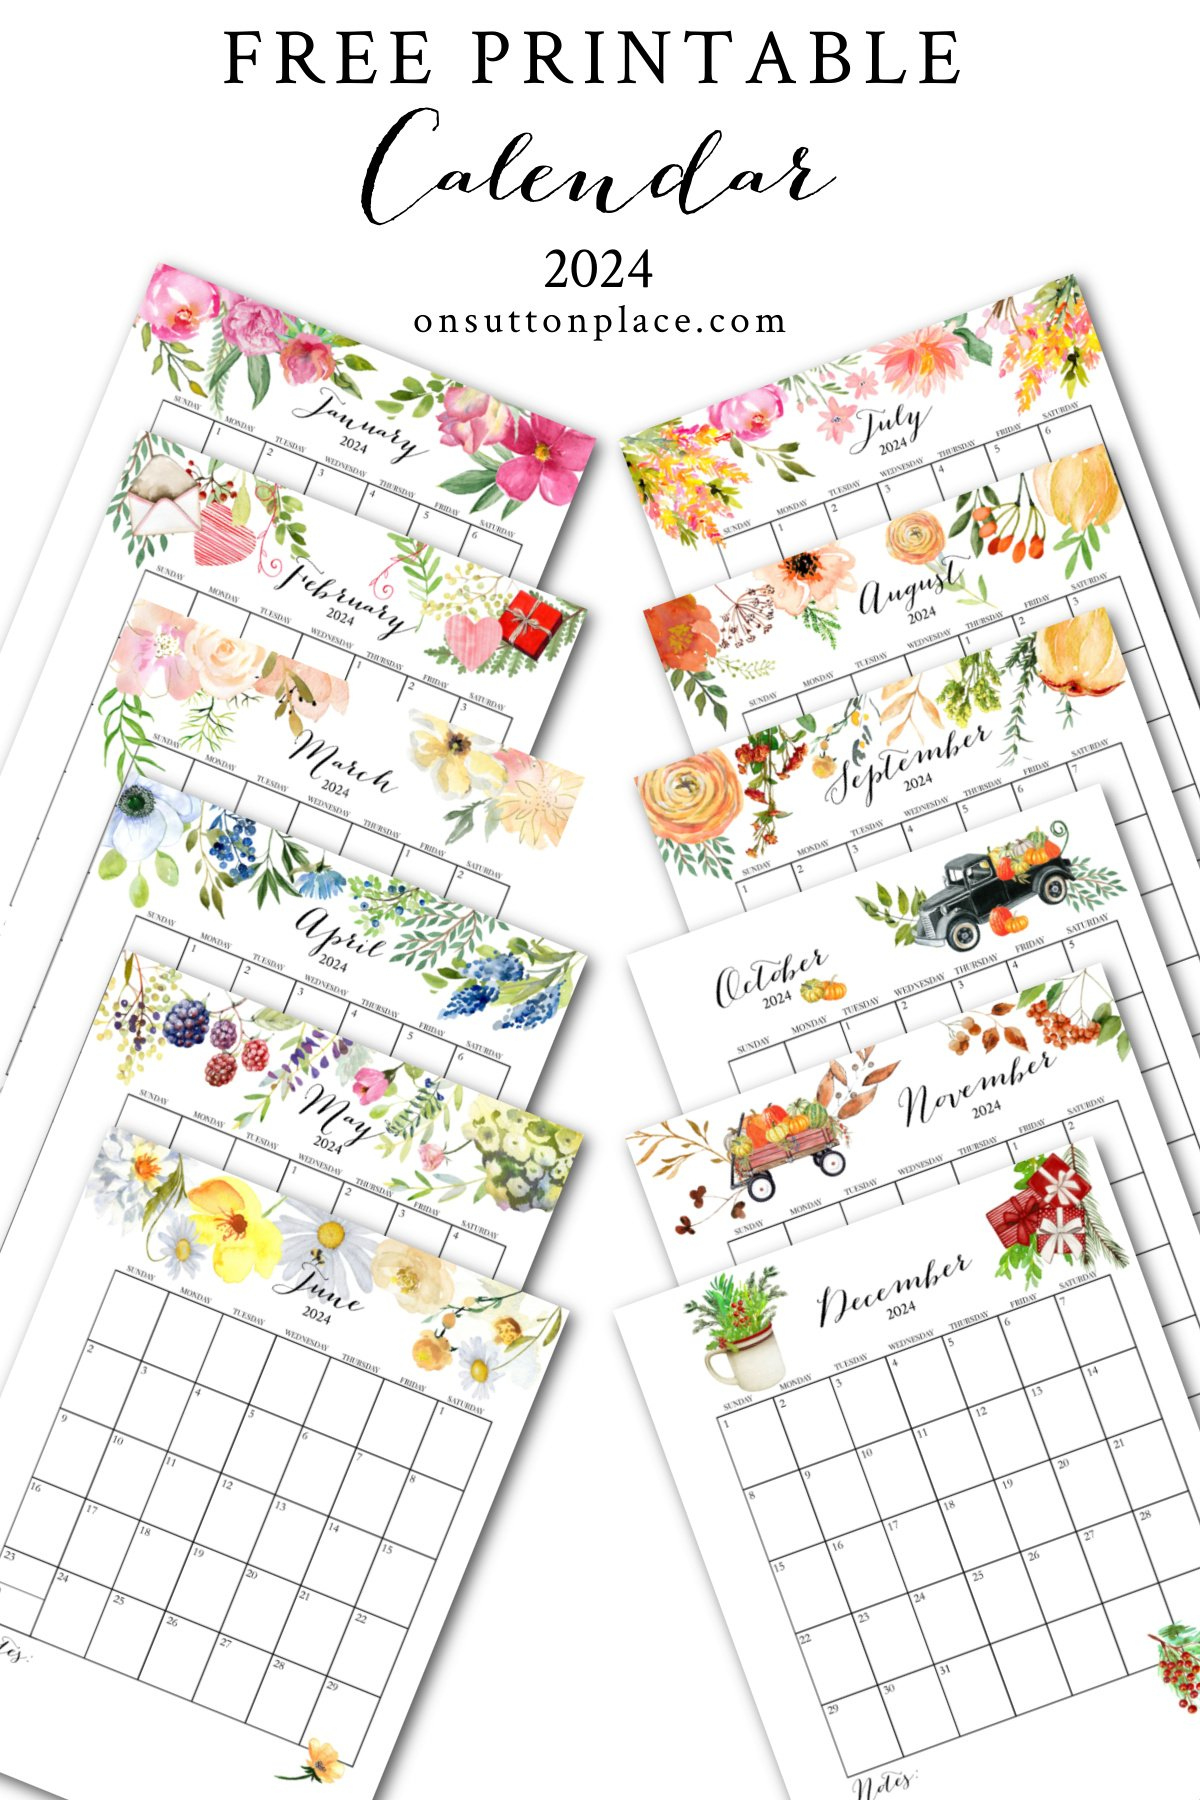 2024 Free Printable Calendar With Planner Pages - On Sutton Place | Printable Calendar 2024 Free